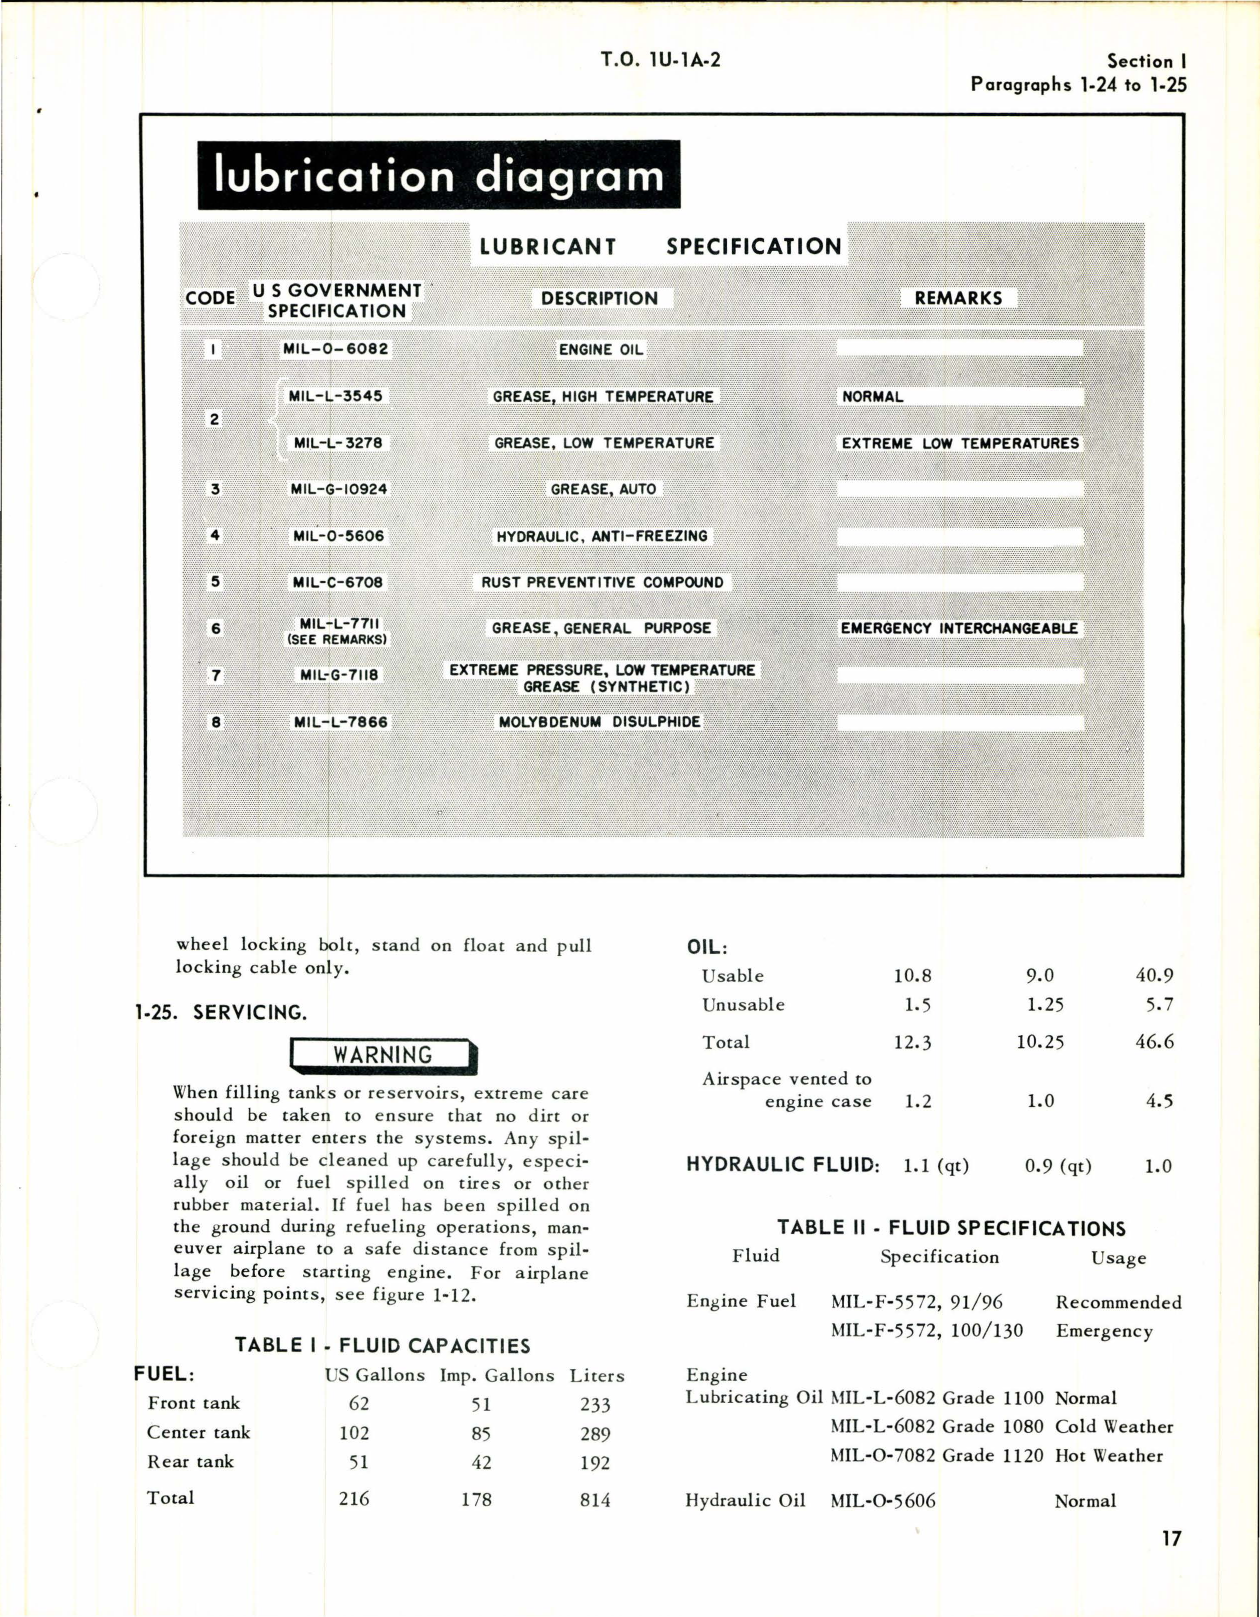 Sample page 9 from AirCorps Library document: Maintenance Instructions for YU-1 and U-1A